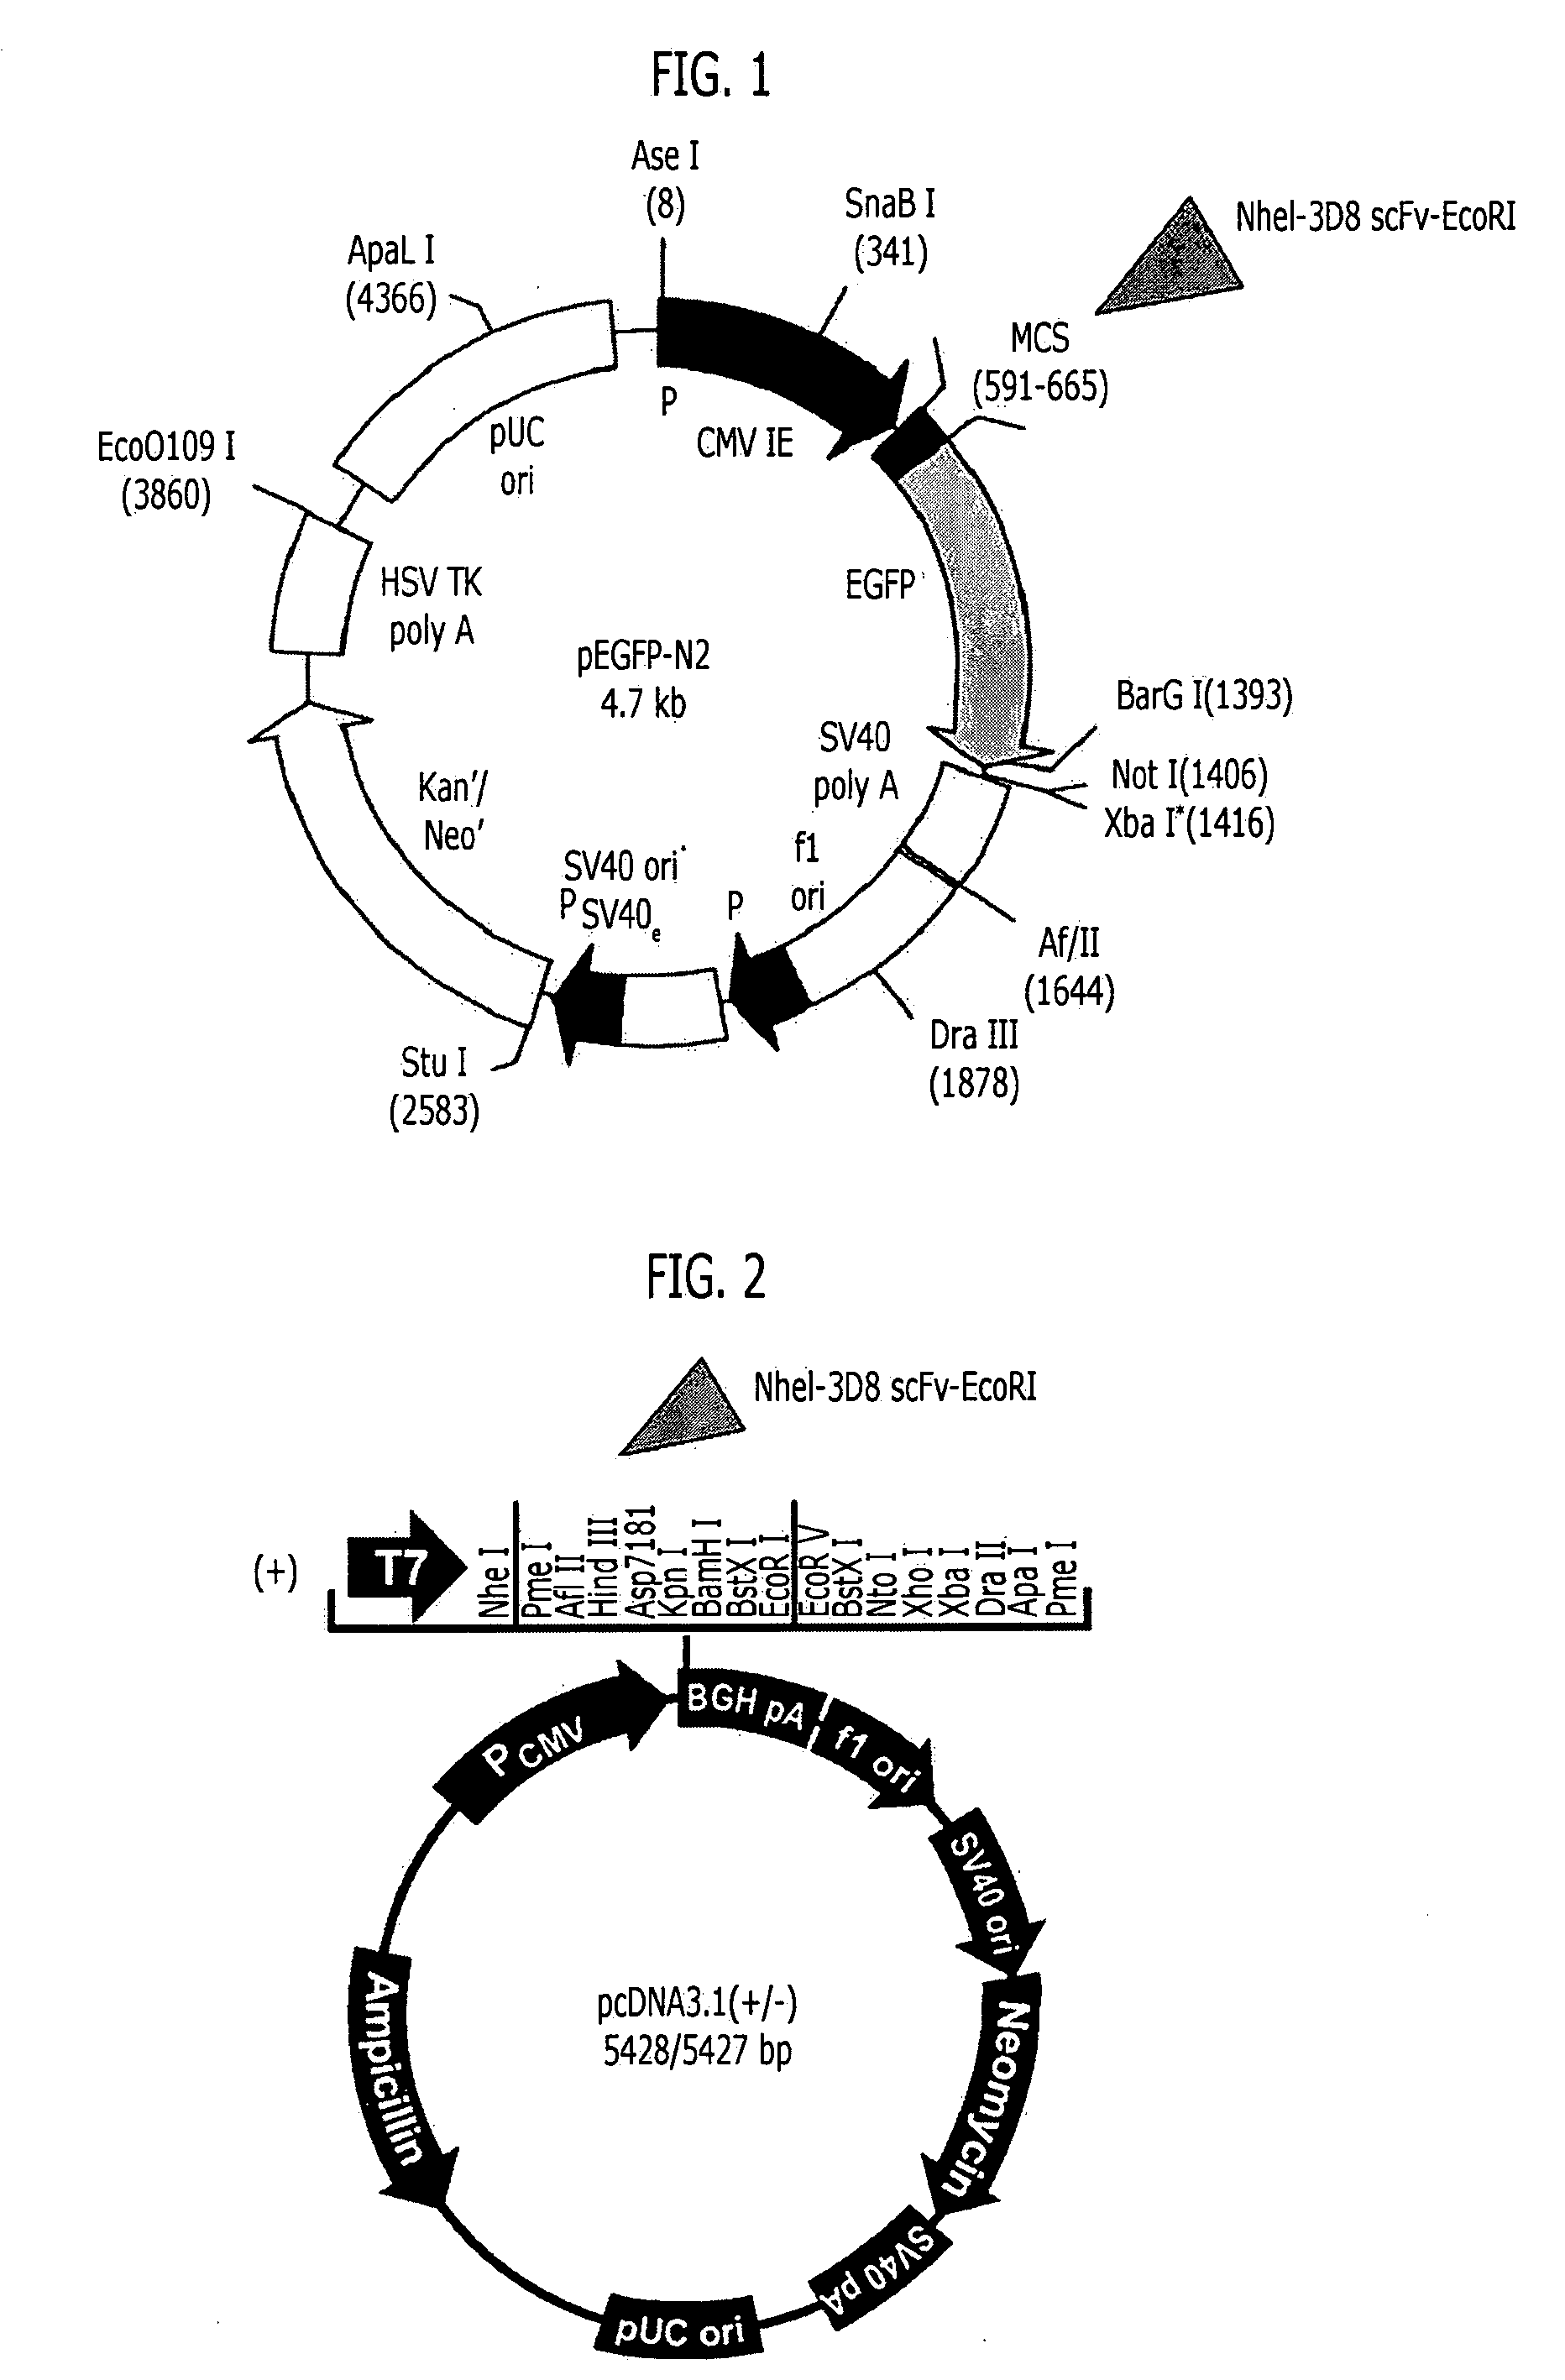 Anti-nucleic acid antibody inducing cell death of cancer cells and composition for preventing or treating cancers comprising the same